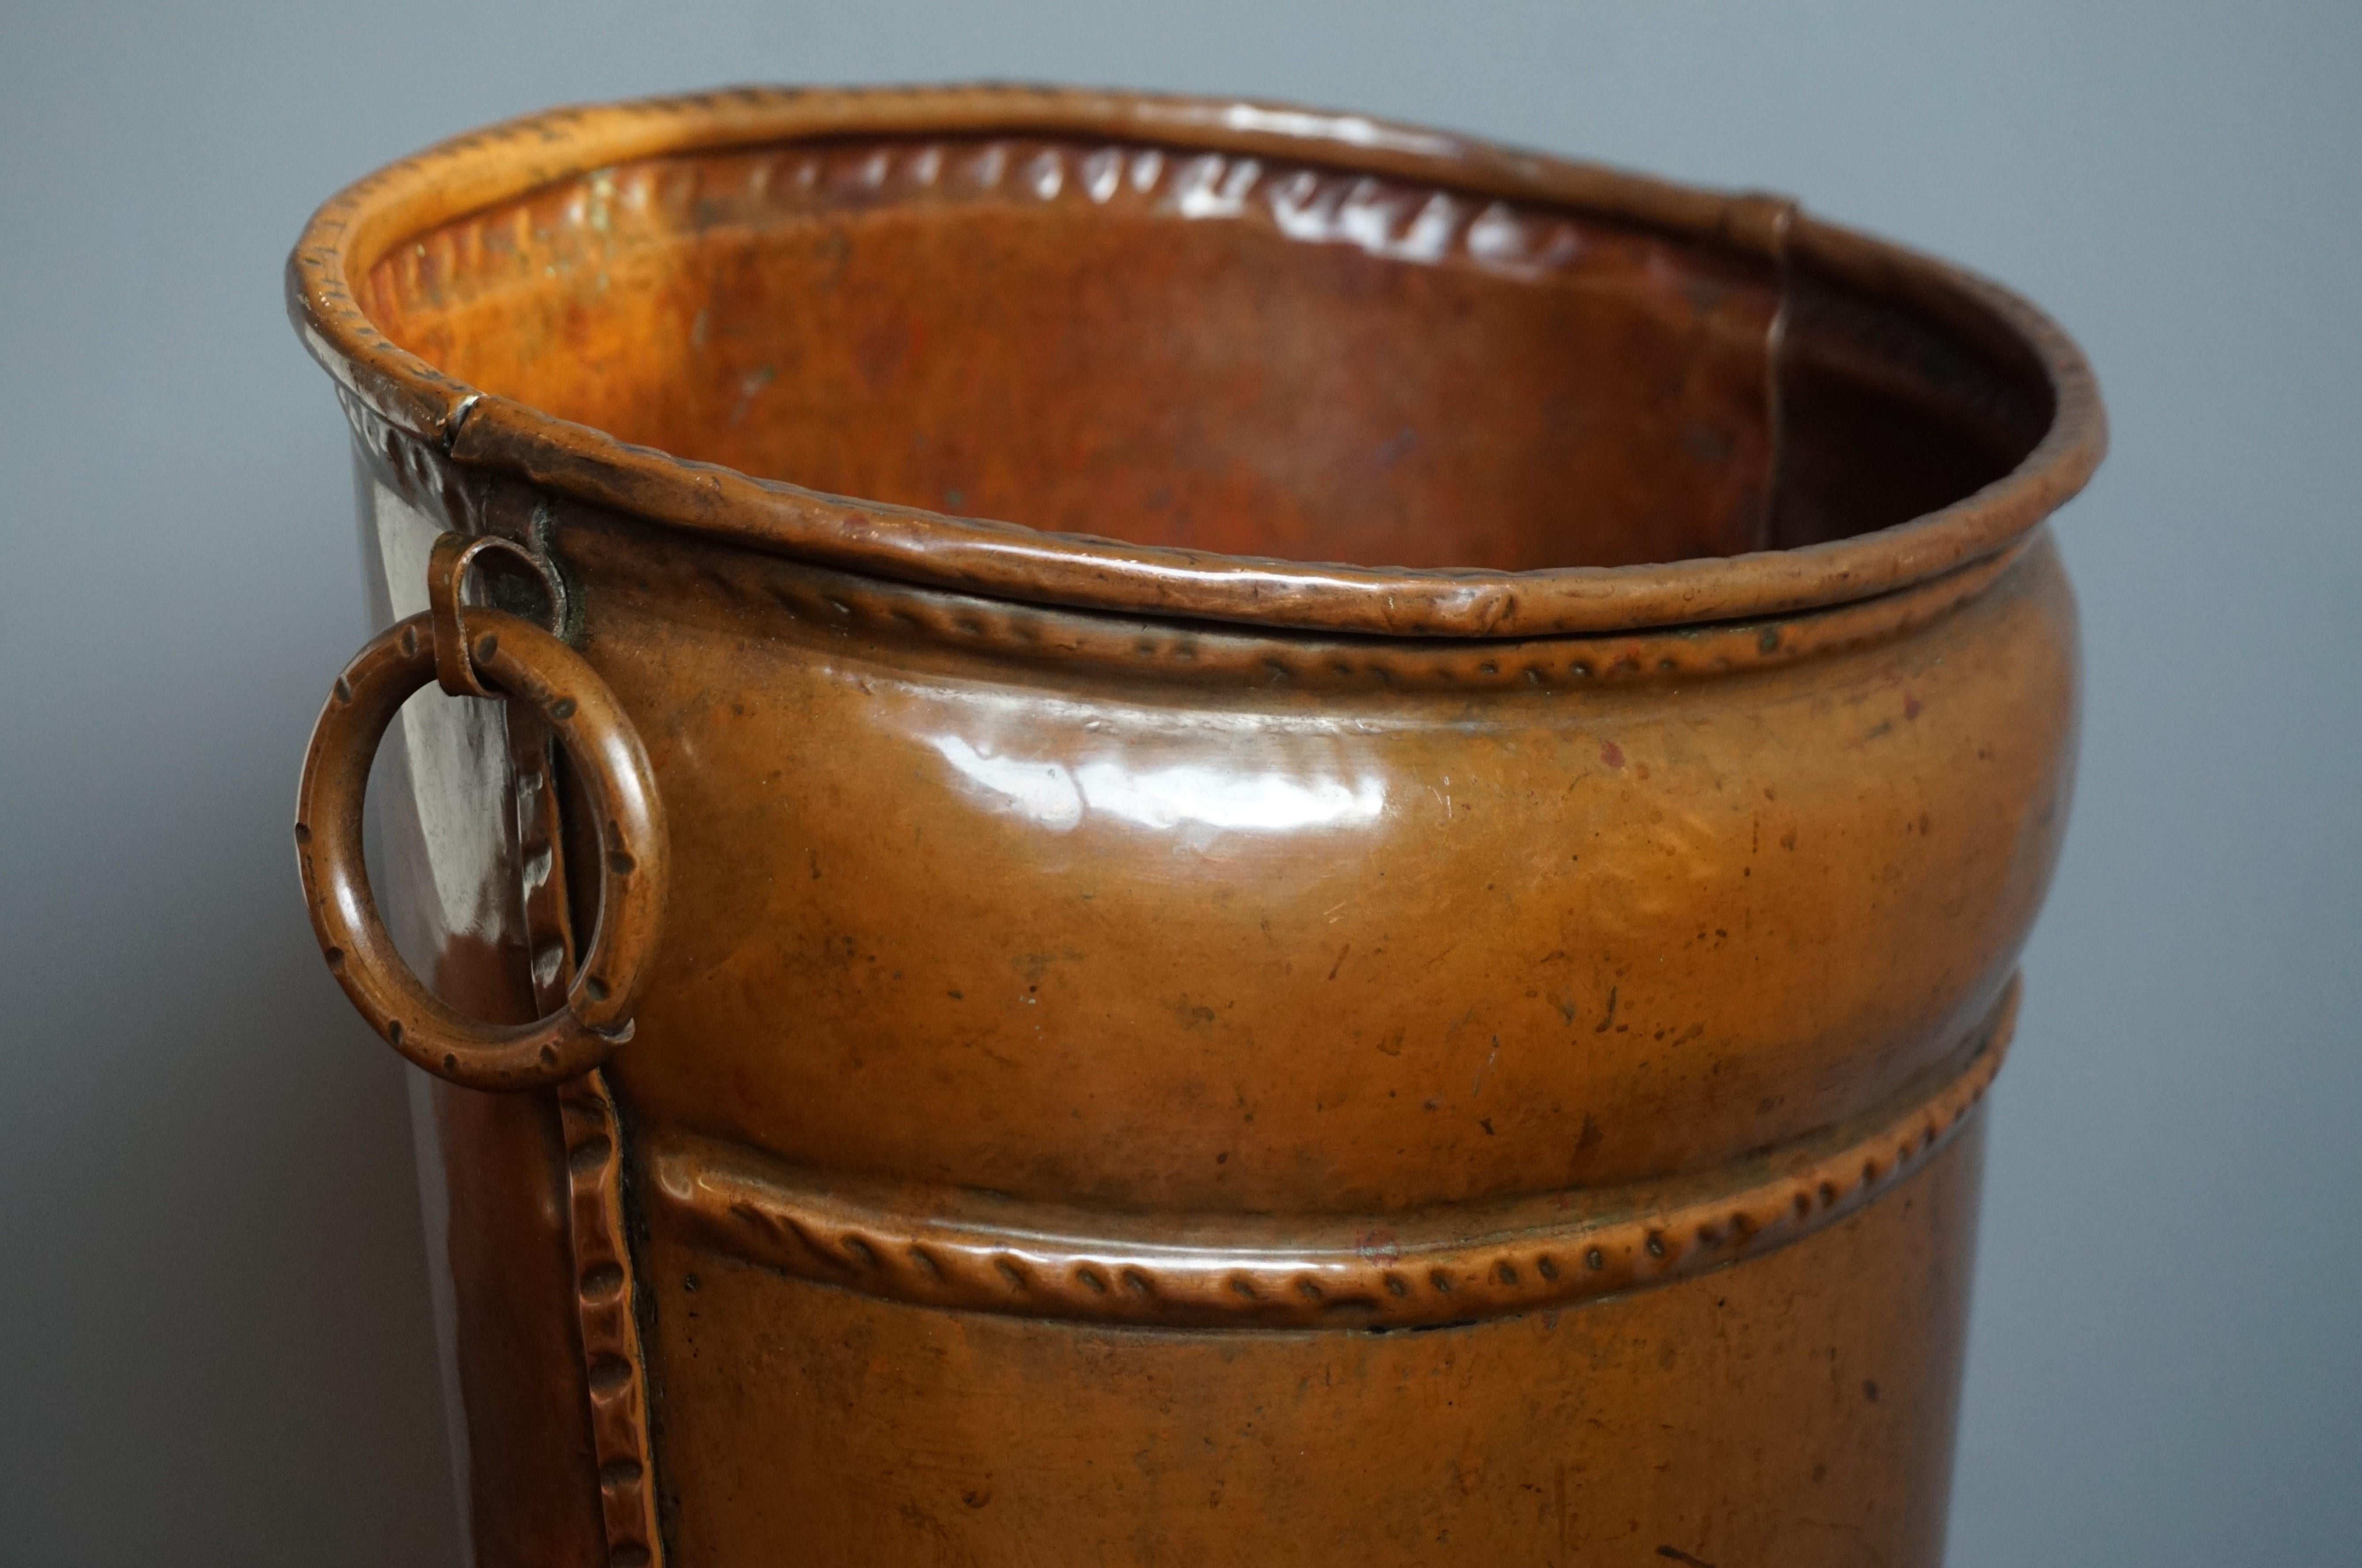 Late 1800s Handcrafted Copper Umbrella Stand Resembling Ancient Leather Bucket For Sale 7